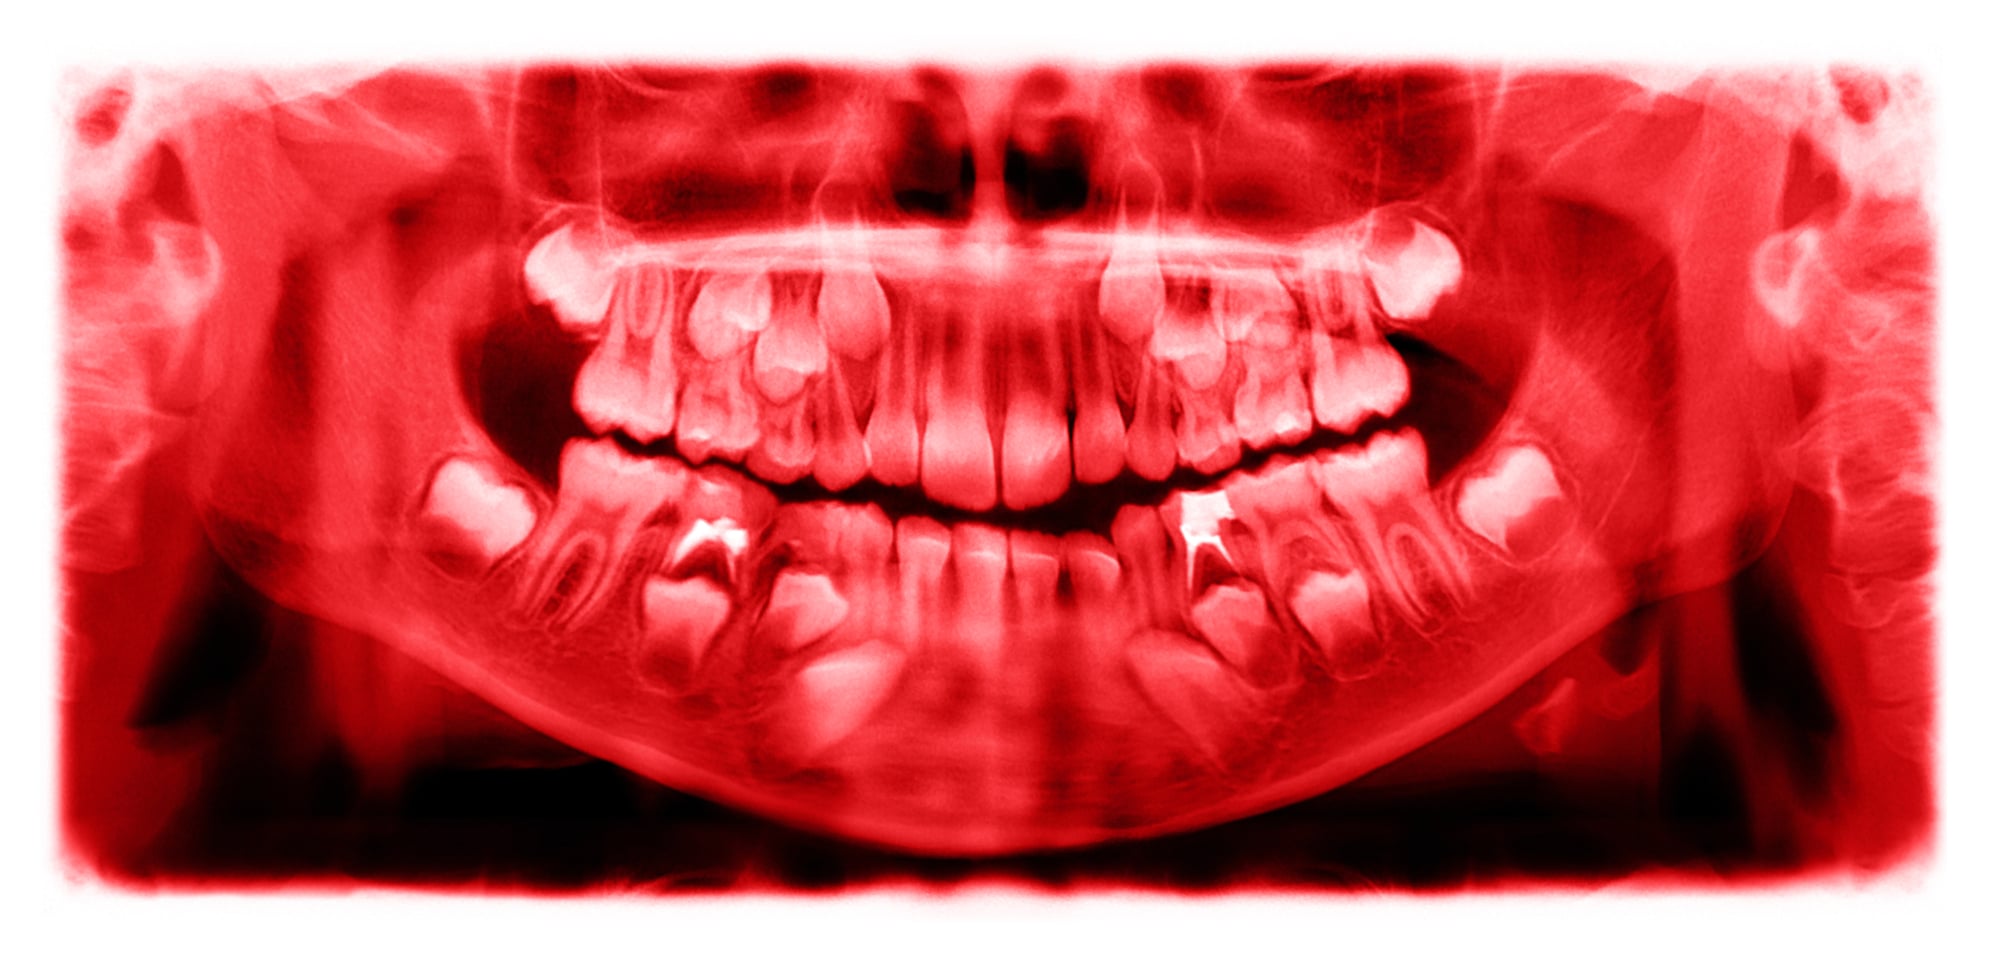 Panoramic radiograph is a scanning dental X-ray of the upper jaw maxilla and lower jawbone mandible a child aged 7 seven years. This image is colored in shades of red.